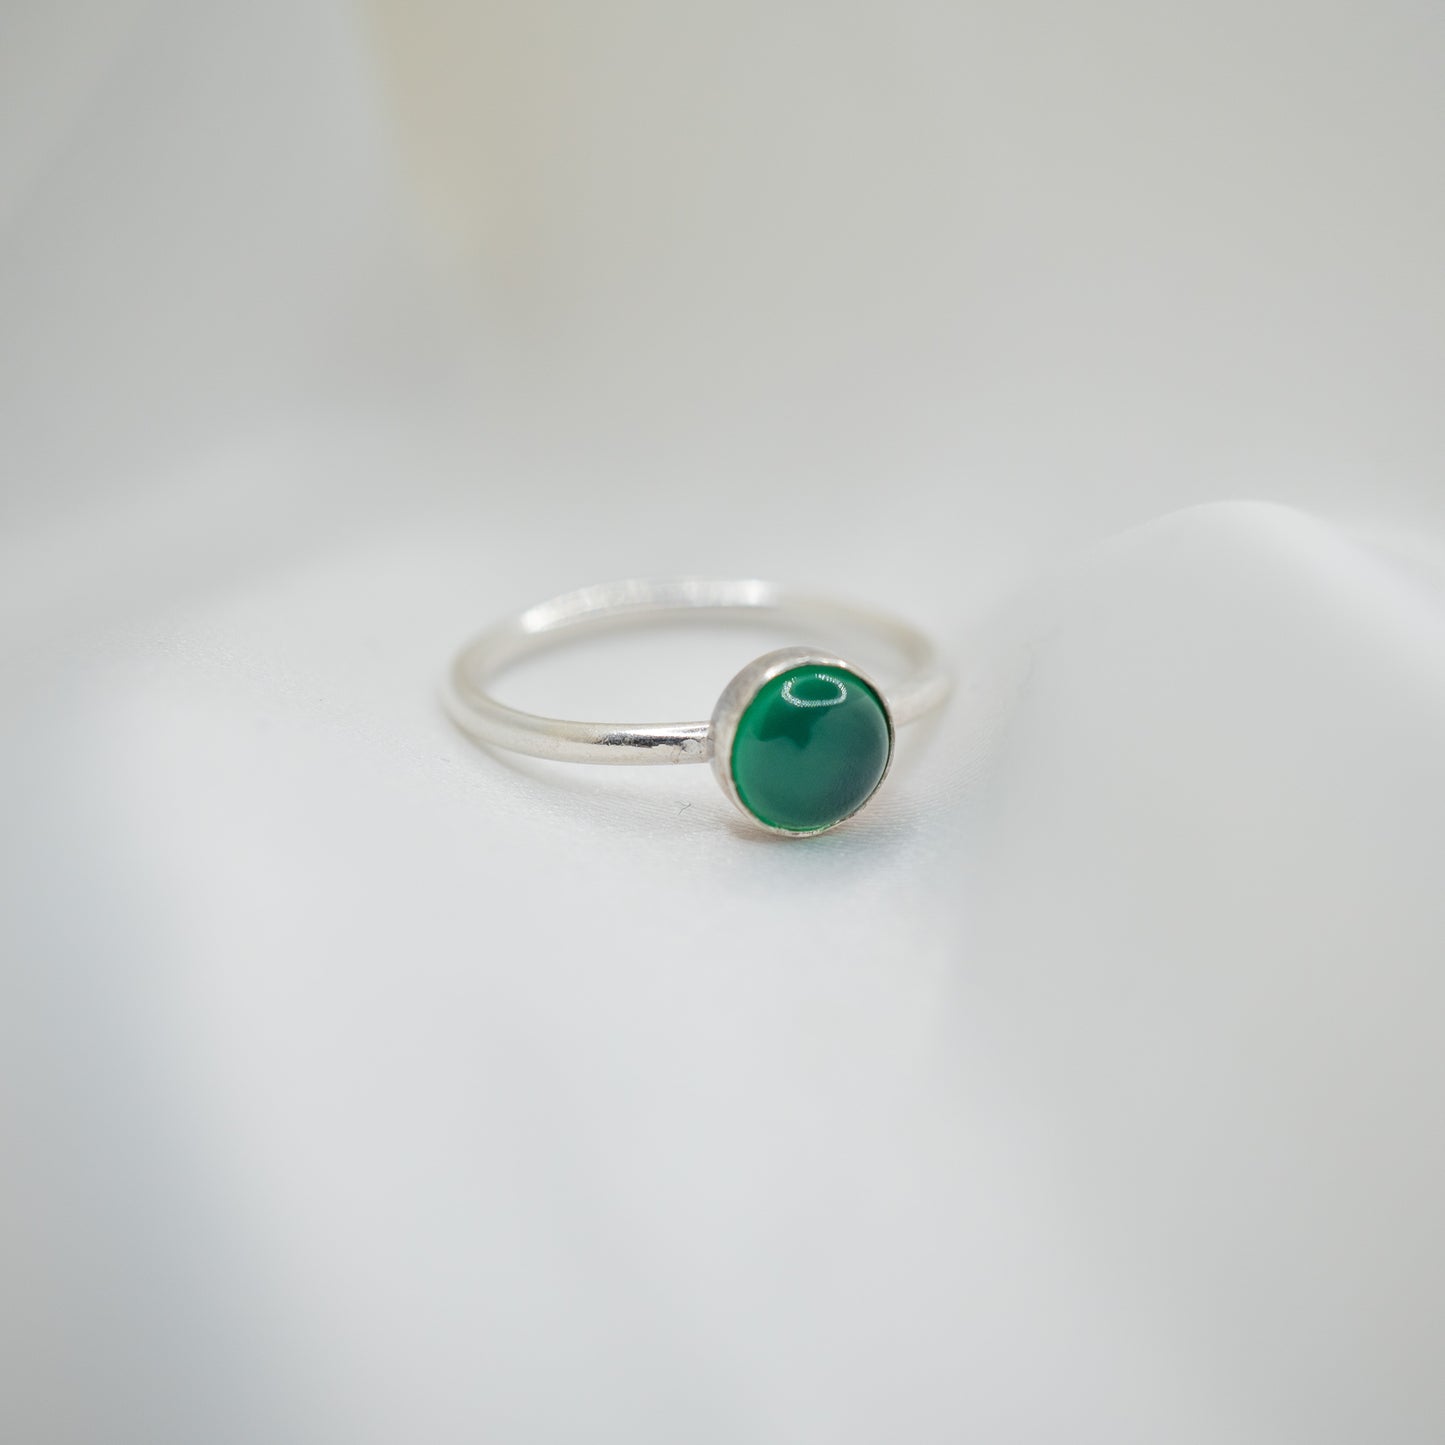 Sterling Silver Green Onyx Cabochon Ring - shot on white - right side view view